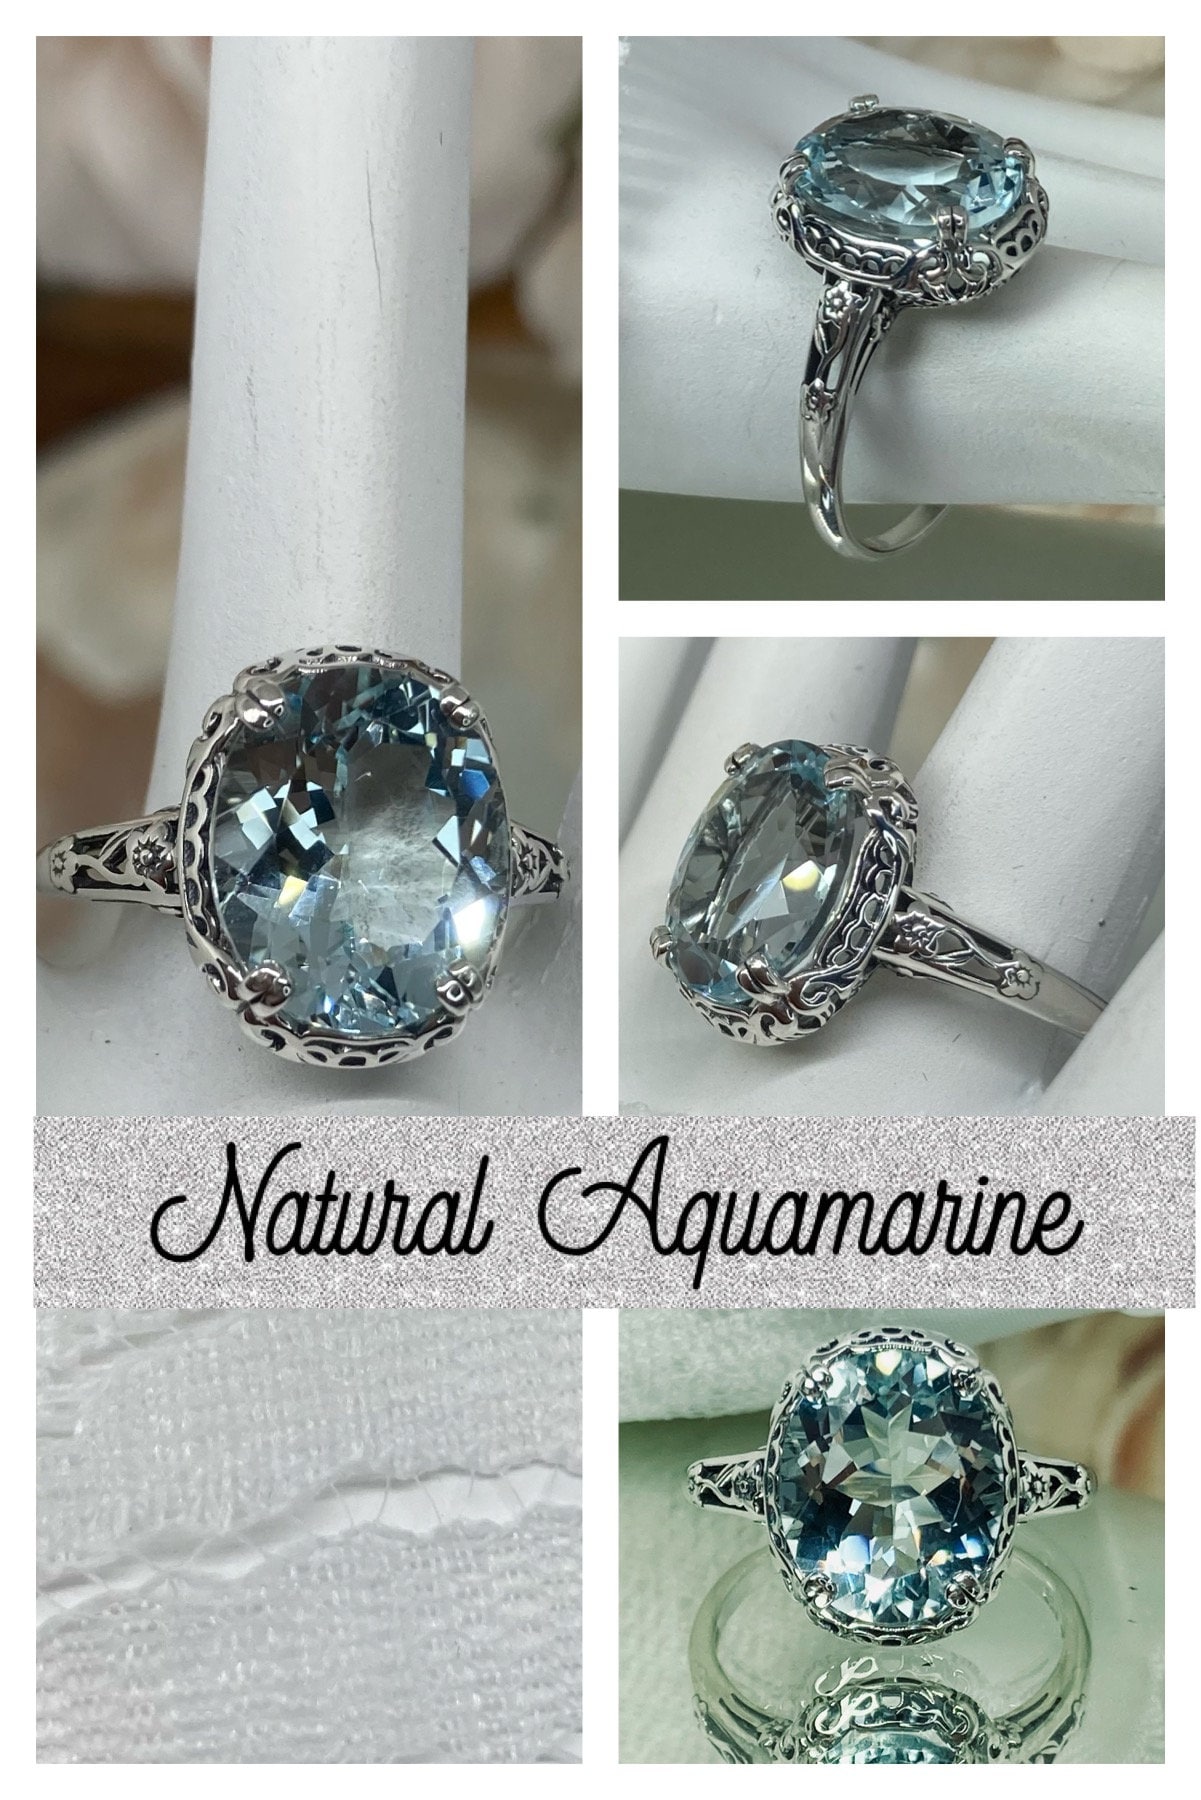 SIM AQUAMARINE ANTIQUE STYLE 925 STERLING SILVER ART DECO RING SIZE 7.75 #913 